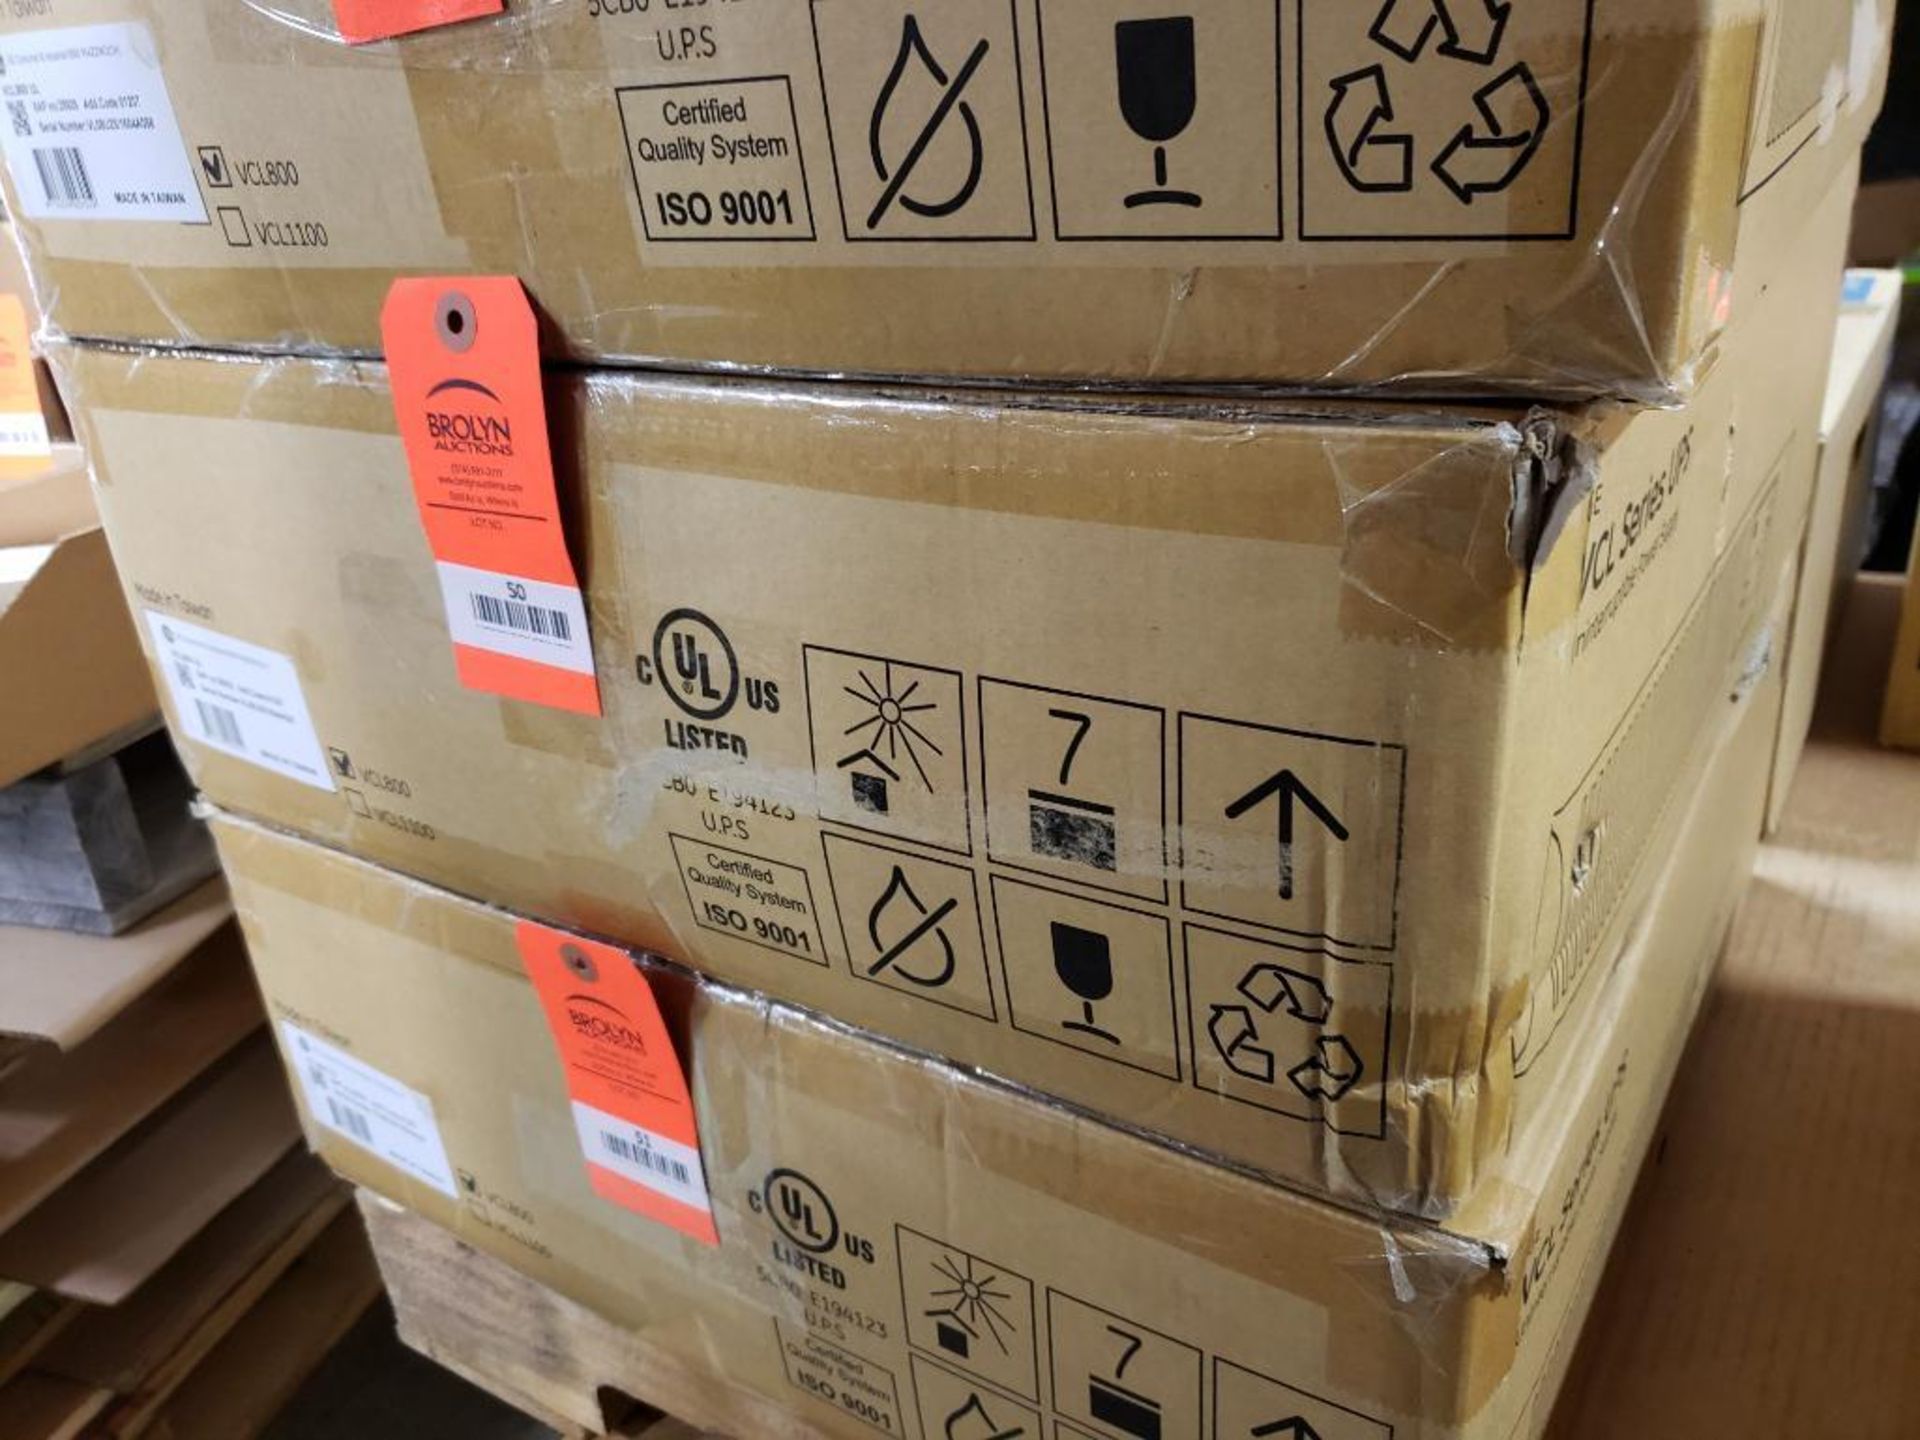 GE VCL1100UL Uninterruptible power supply. New in box.